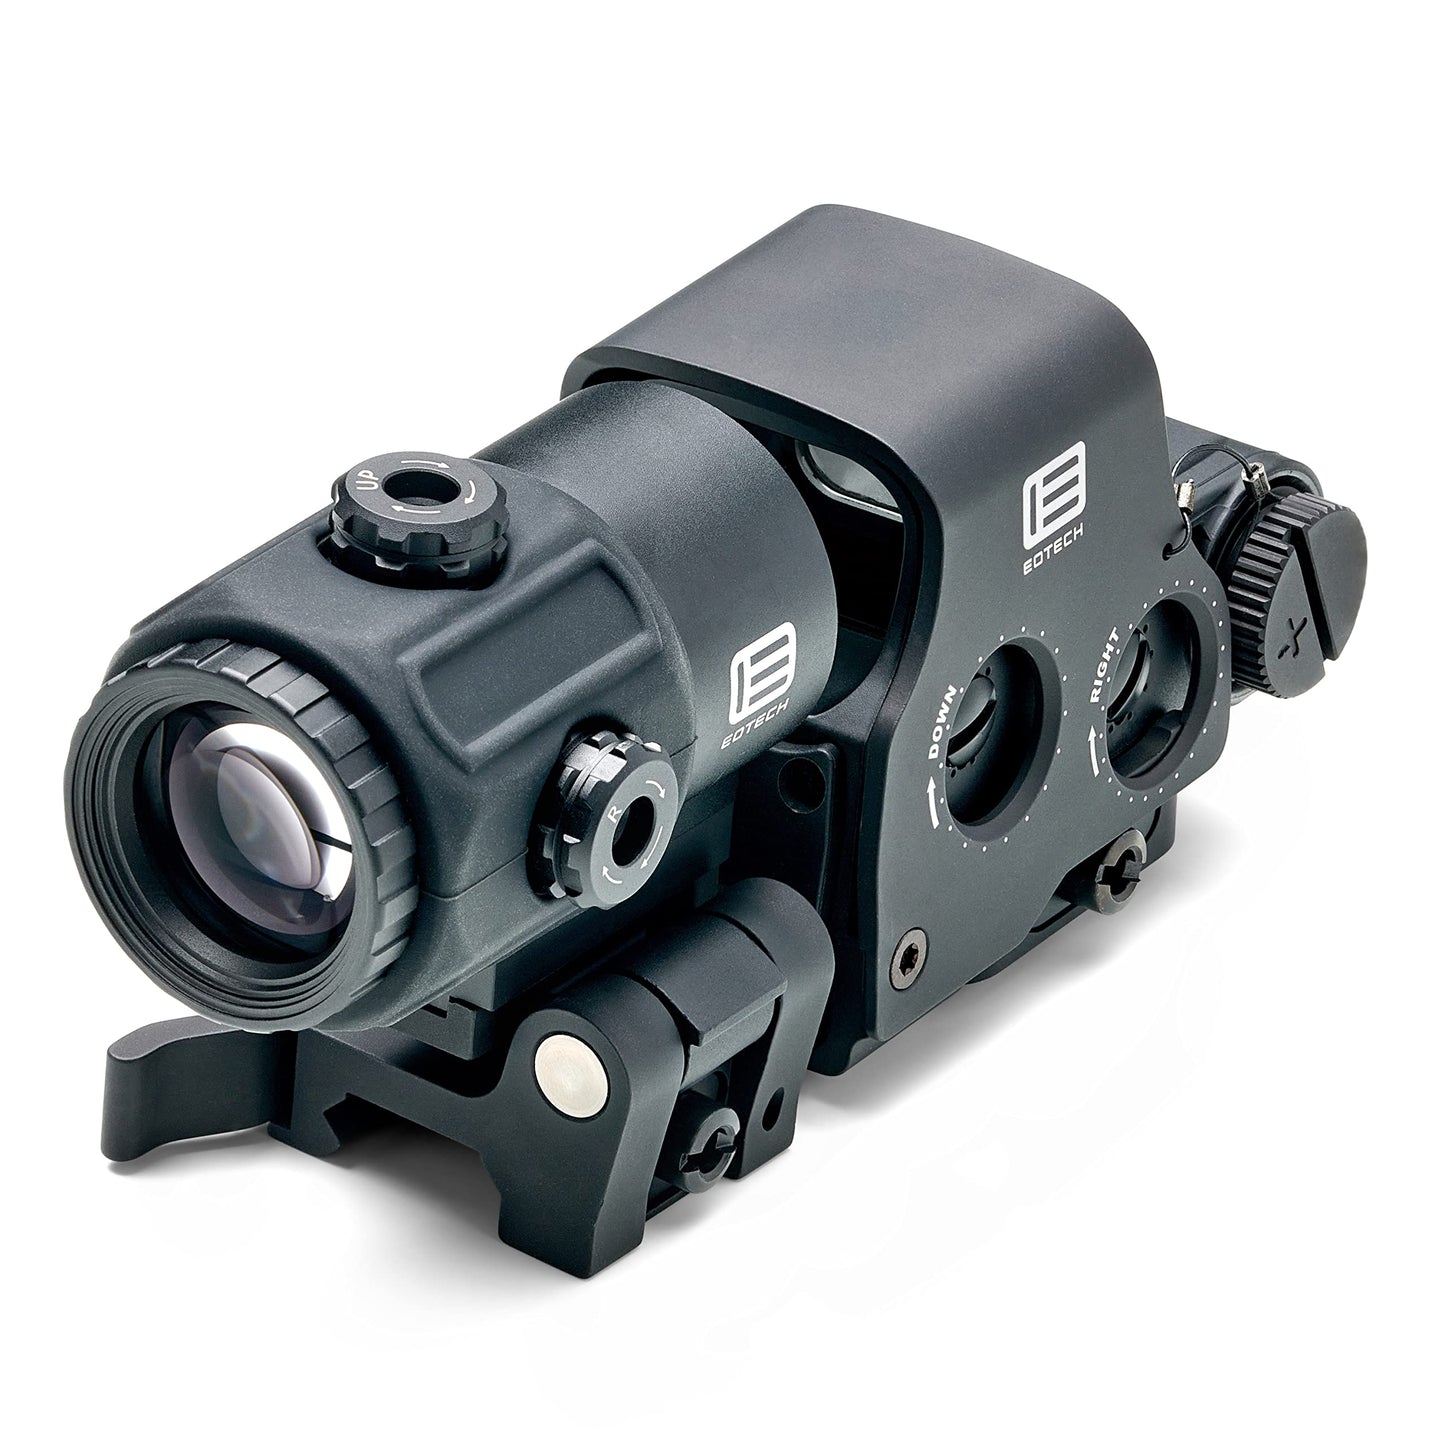 HHS VI Holographic Hybrid Sight - EXPS3-2 with G43 Magnifier, Micro 3 Power Magnifier with Quick Disconnect, Switch to Side (STS) Mount in Black